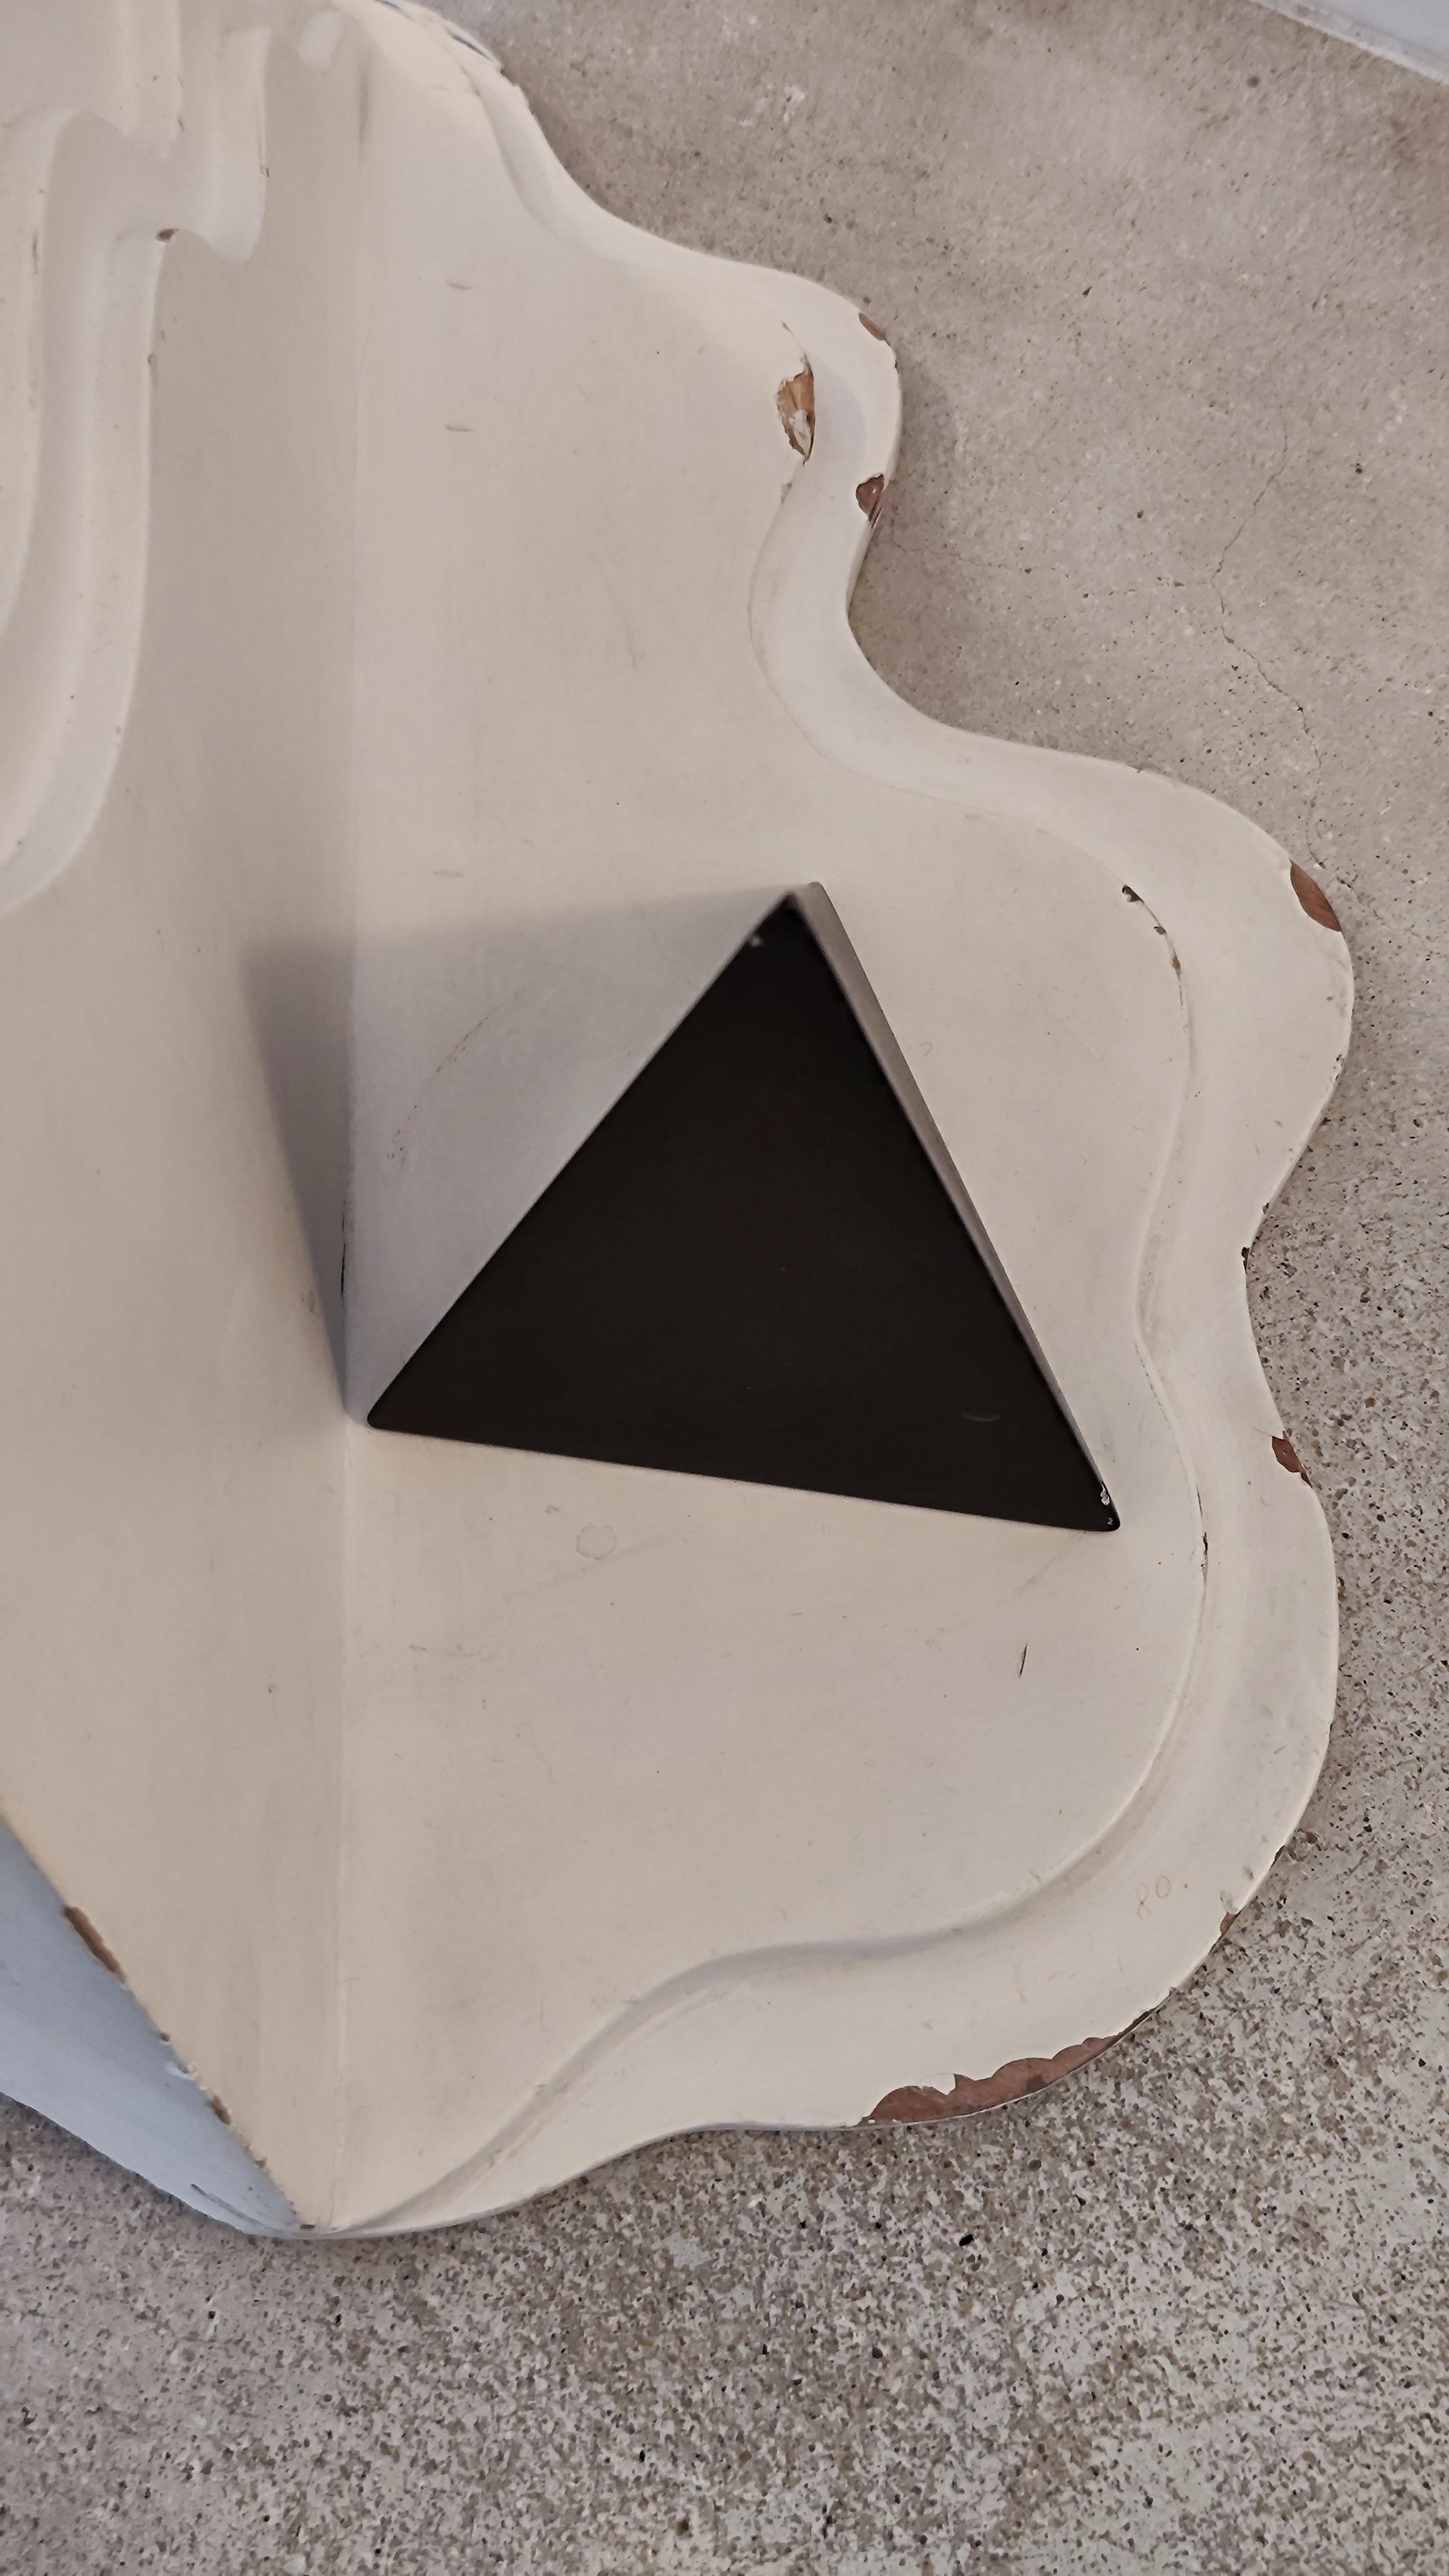 Abstract post modern polychrome pyramid sculpture, Memphis movement 1980
.
Wood
Signed and dated 80s 
.
Dimensions : 
.
As you can see in the photos, there are many gaps which in no way detract from the beauty of this piece.
.
It is damaged in many